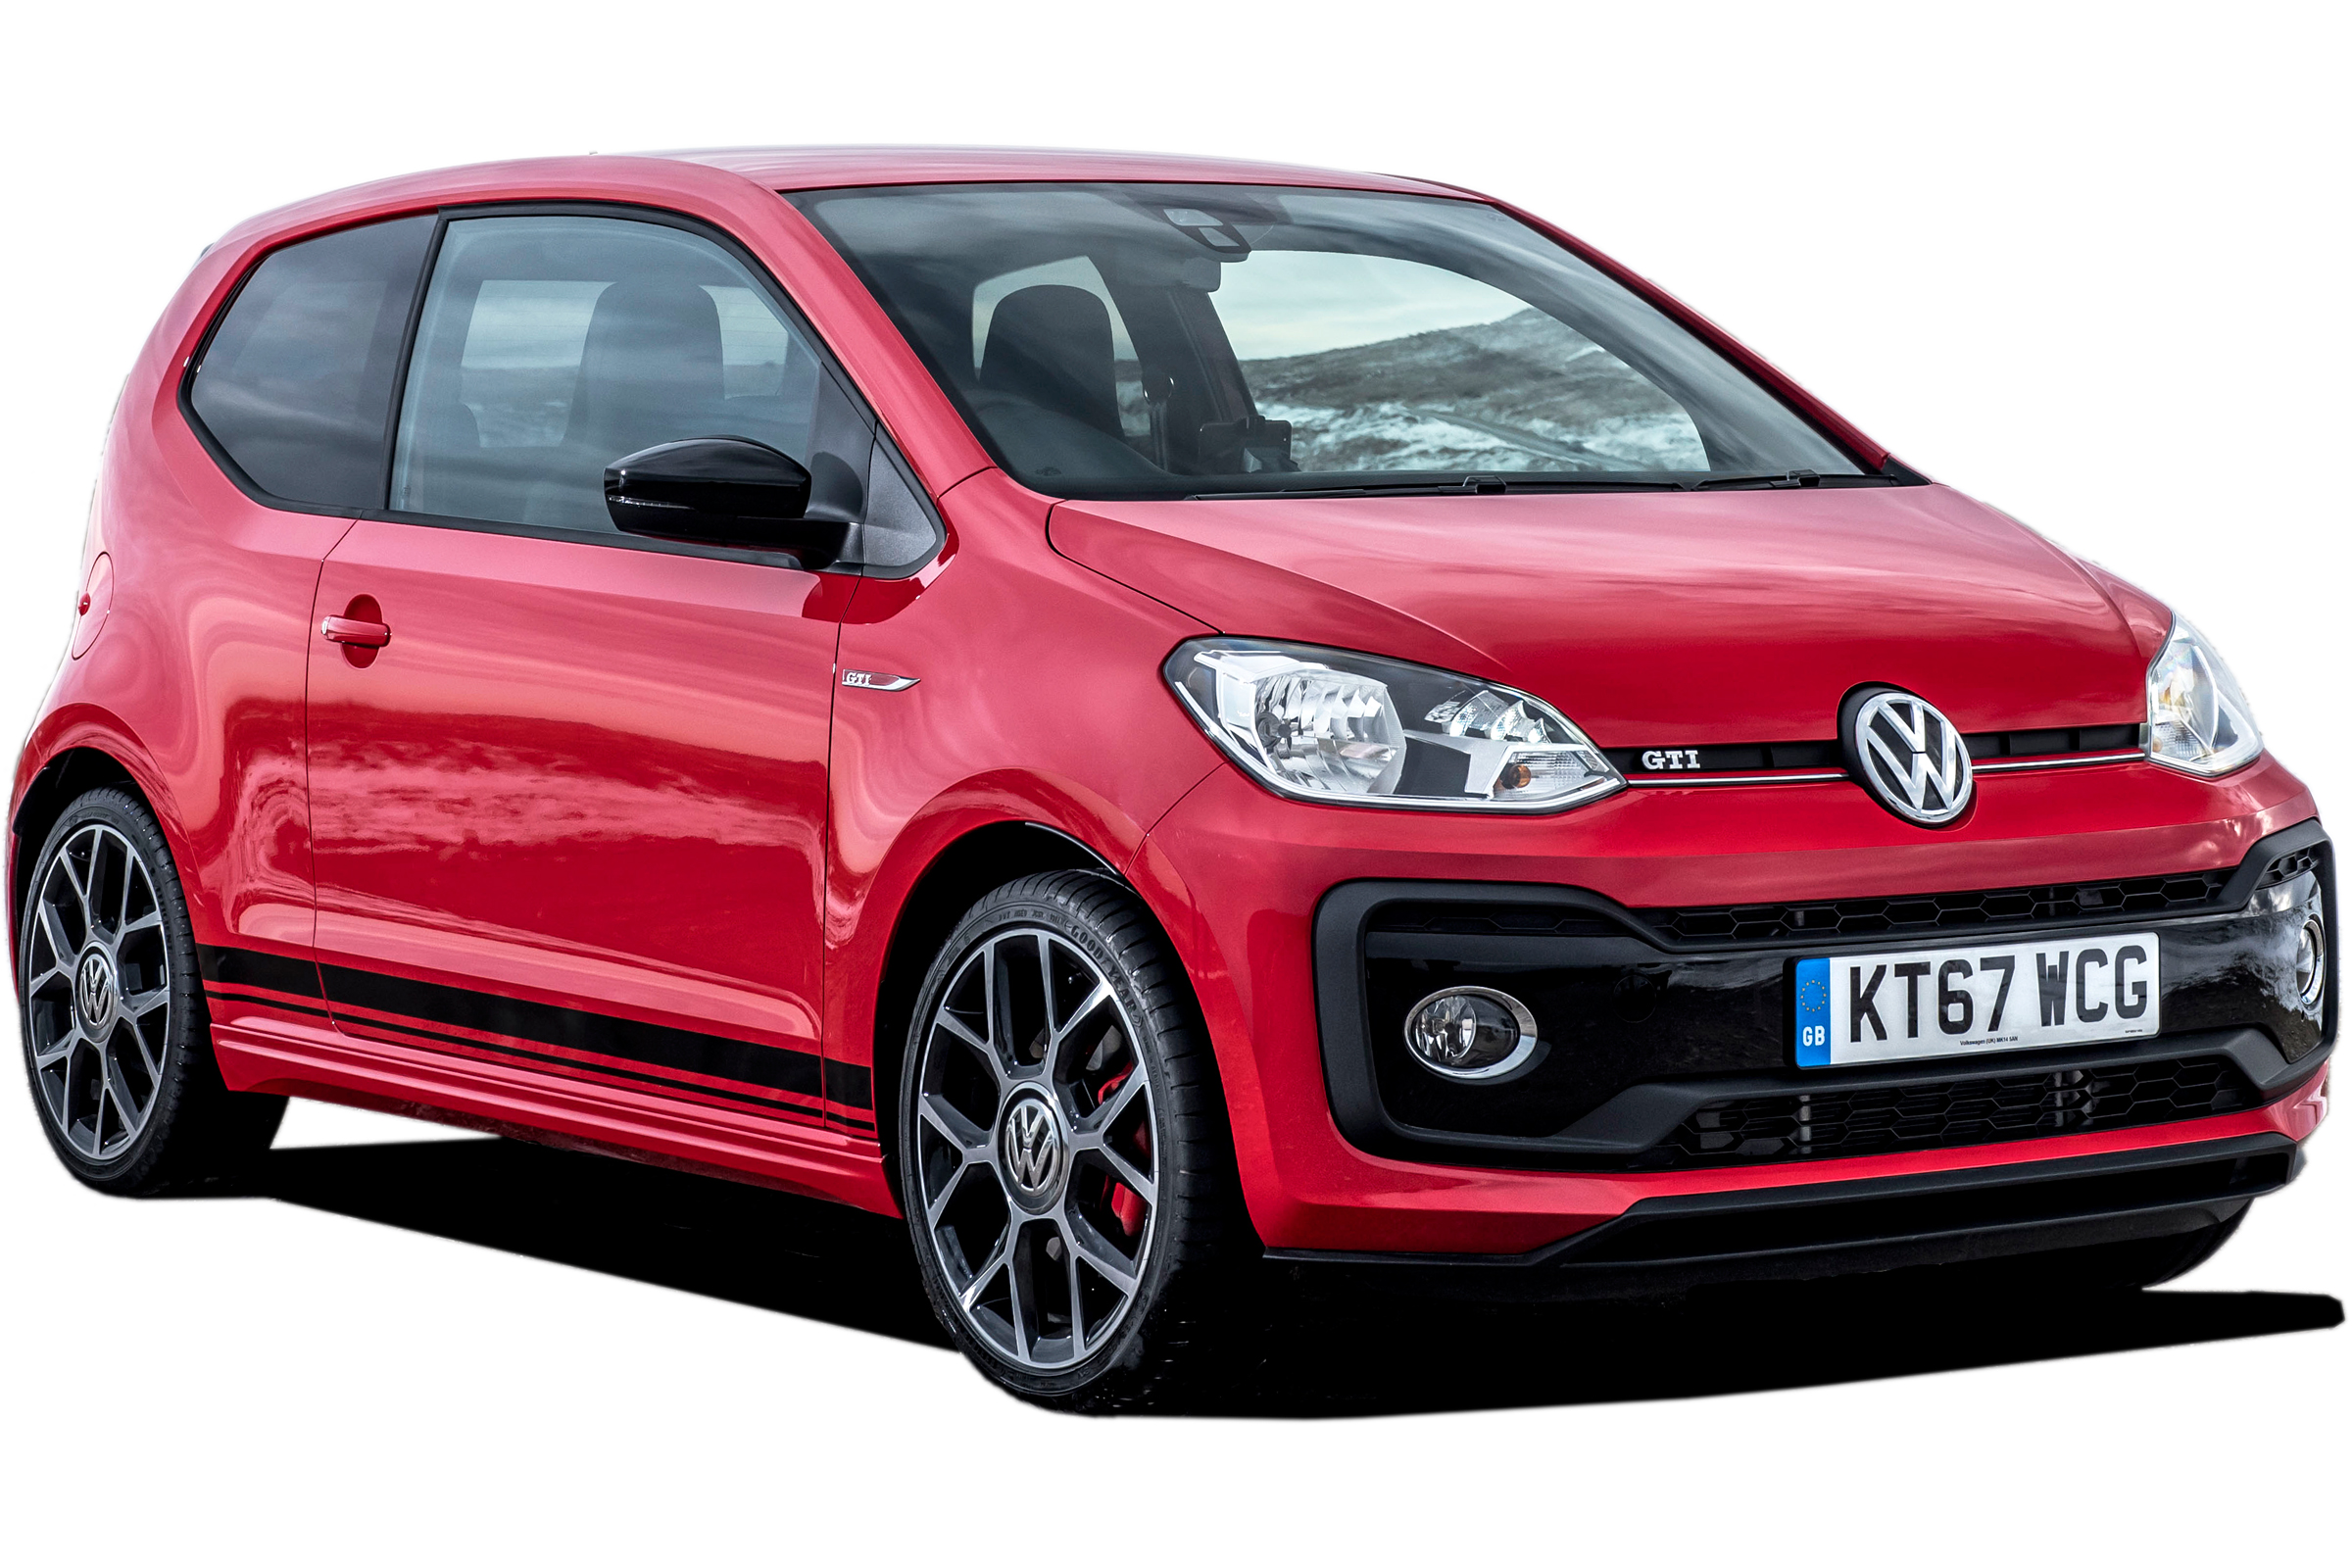 https://mediacloud.carbuyer.co.uk/image/private/s--iultvgCZ--/v1584464495/carbuyer/car_images/vw-up-gti-cutoutuk.jpg